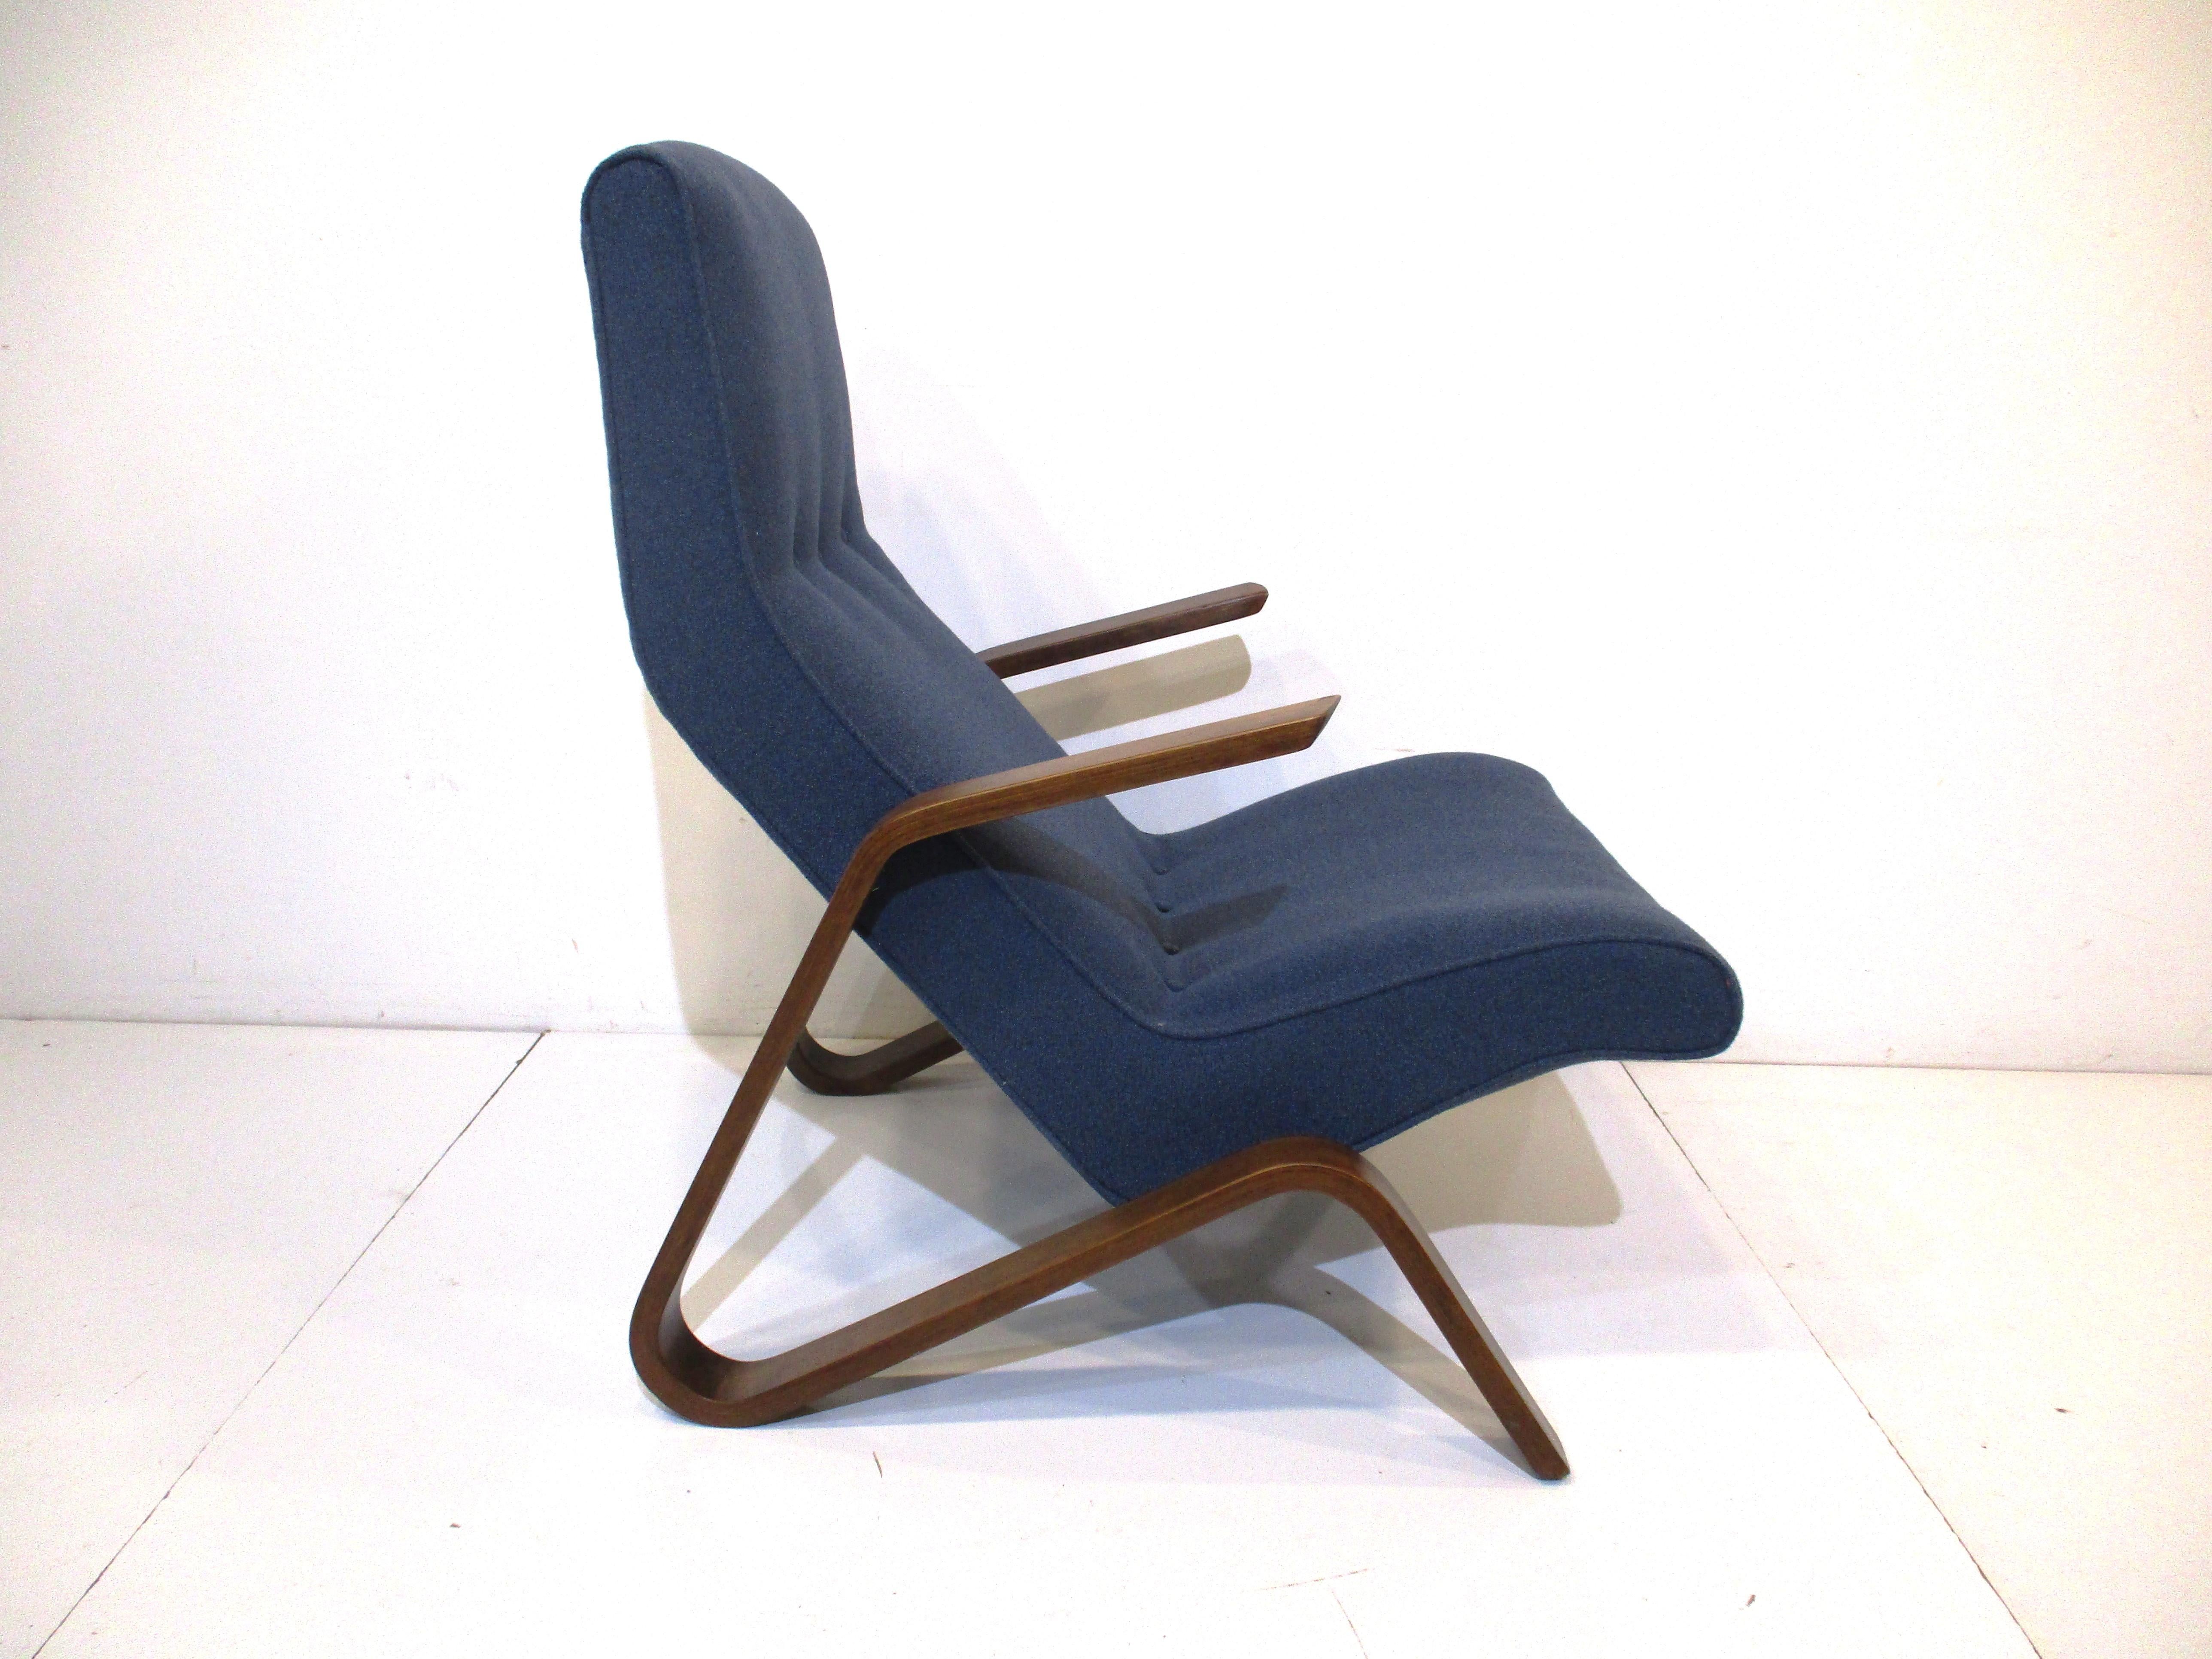 American Grasshopper Lounge Chair by Eero Saarinen for Knoll